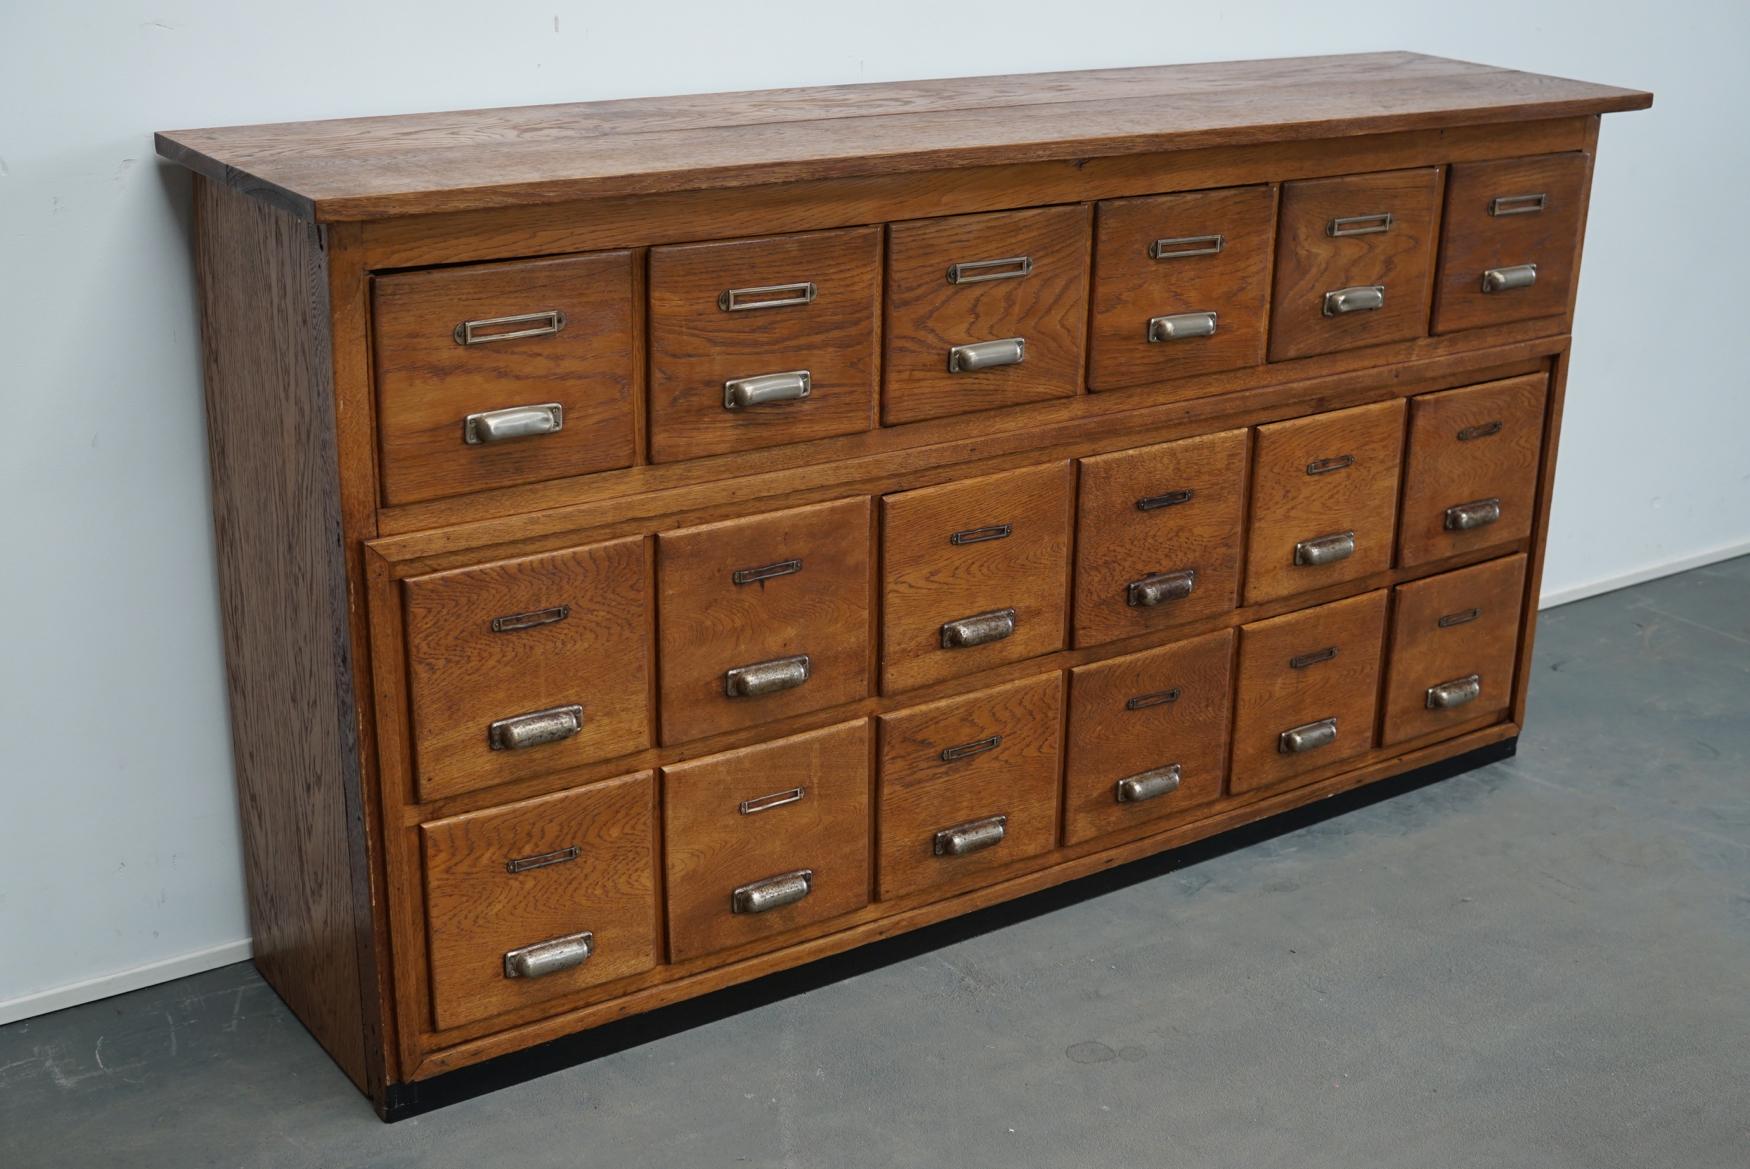 This apothecary cabinet was produced during the 1940s in the Netherlands. This piece features 18 drawers with nice metal cup handles and name card holders. It was originally used in a bakery to store the cookies. It still has most of the removable